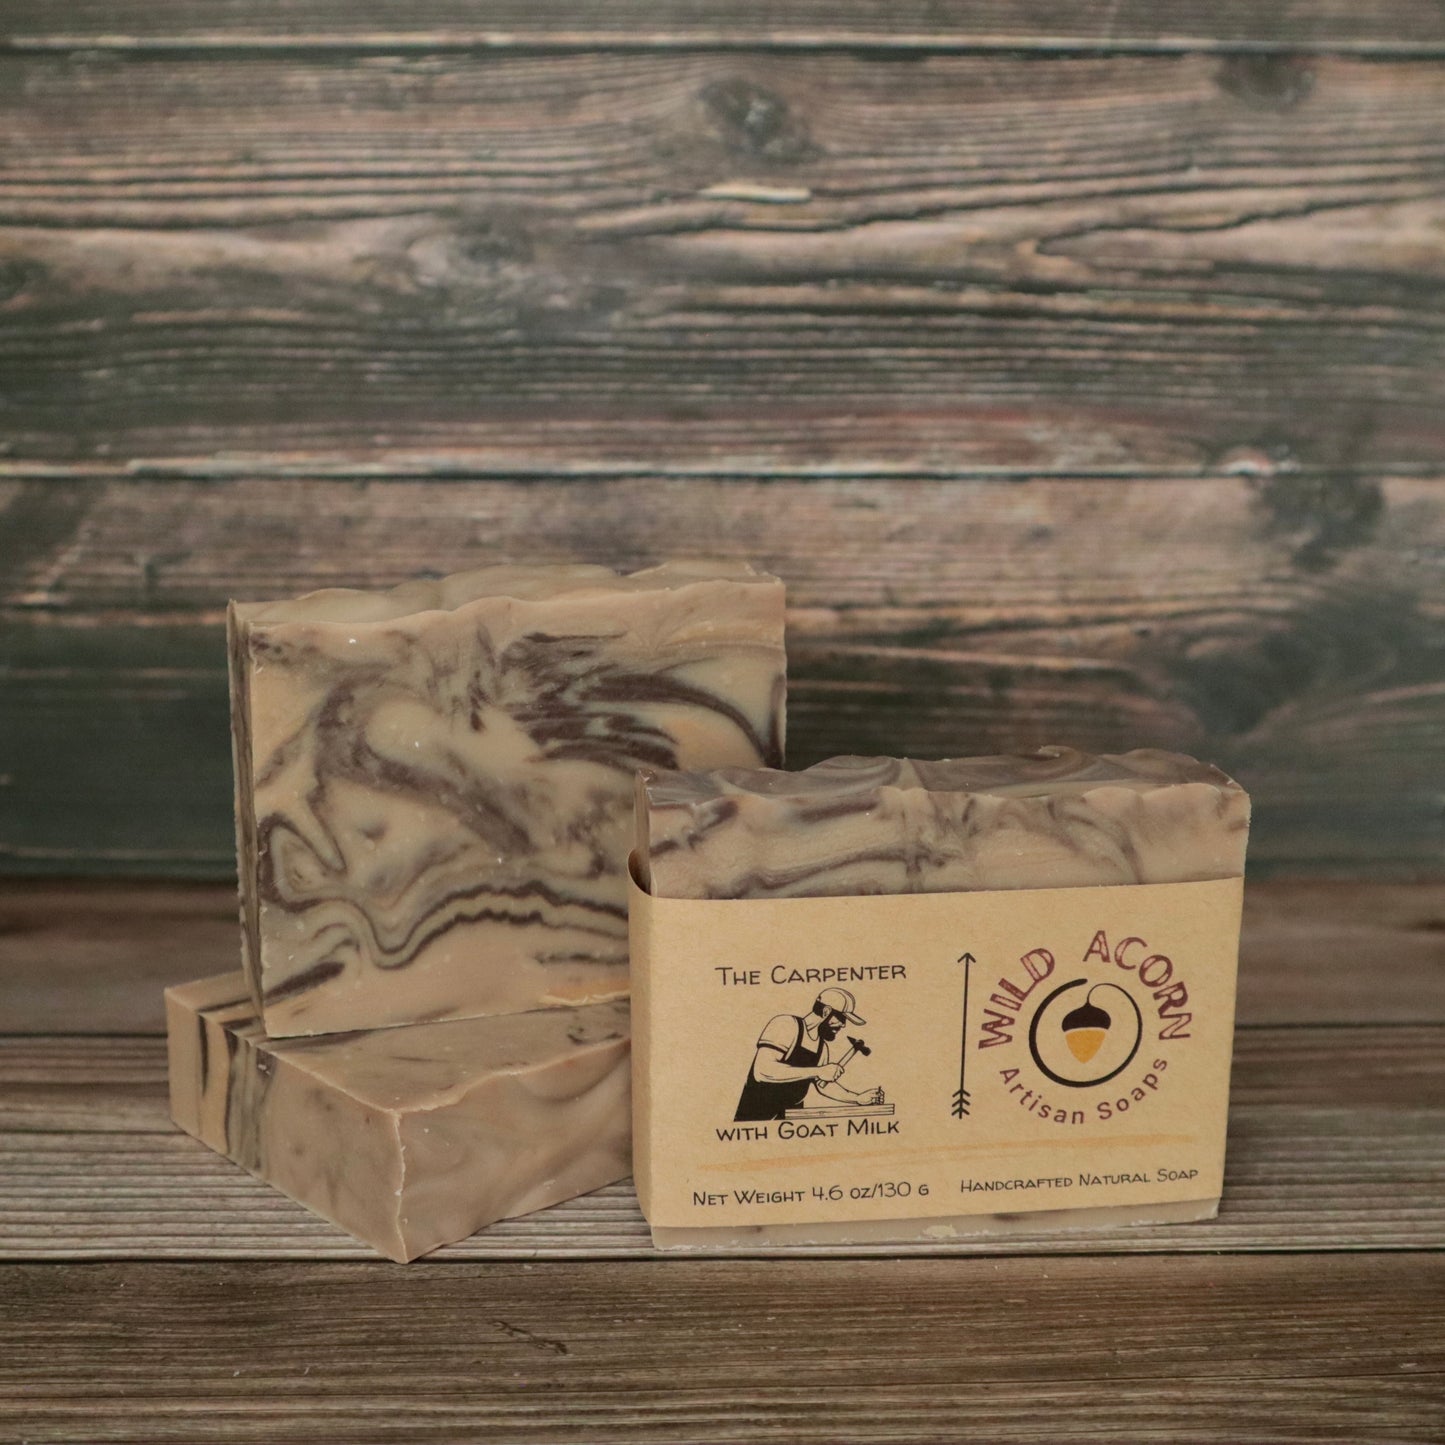 "The Carpenter" Soap with Goat Milk